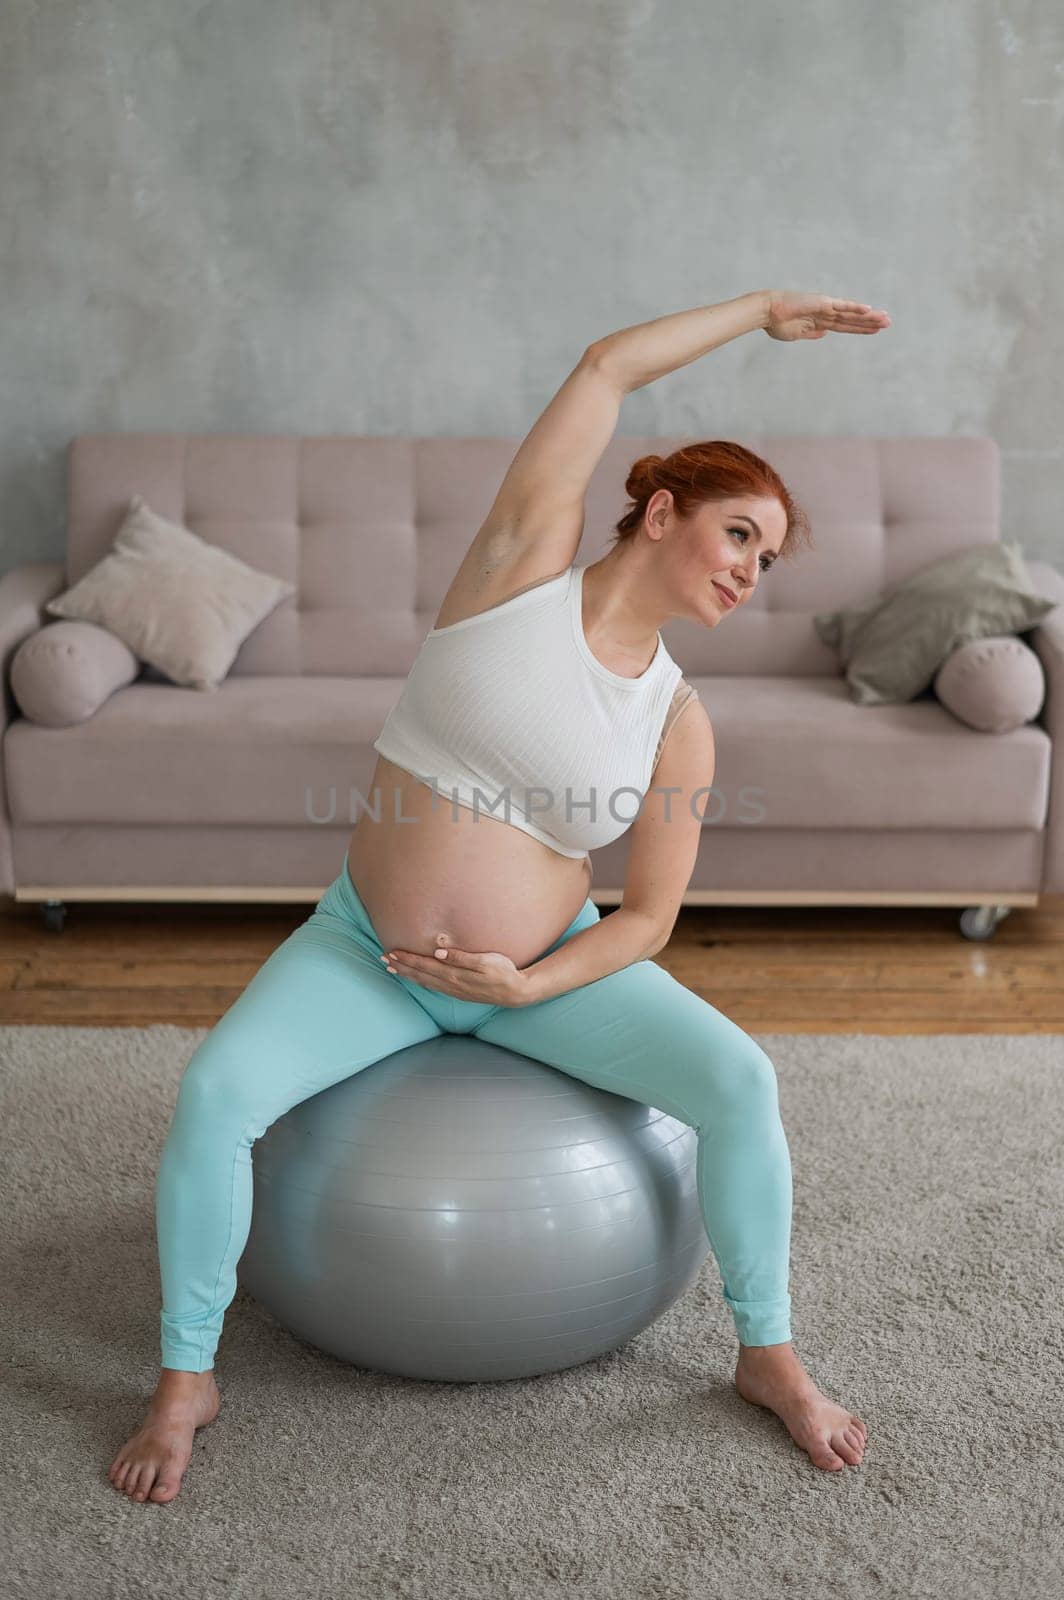 Pregnant woman doing lateral bends on a fitball at home